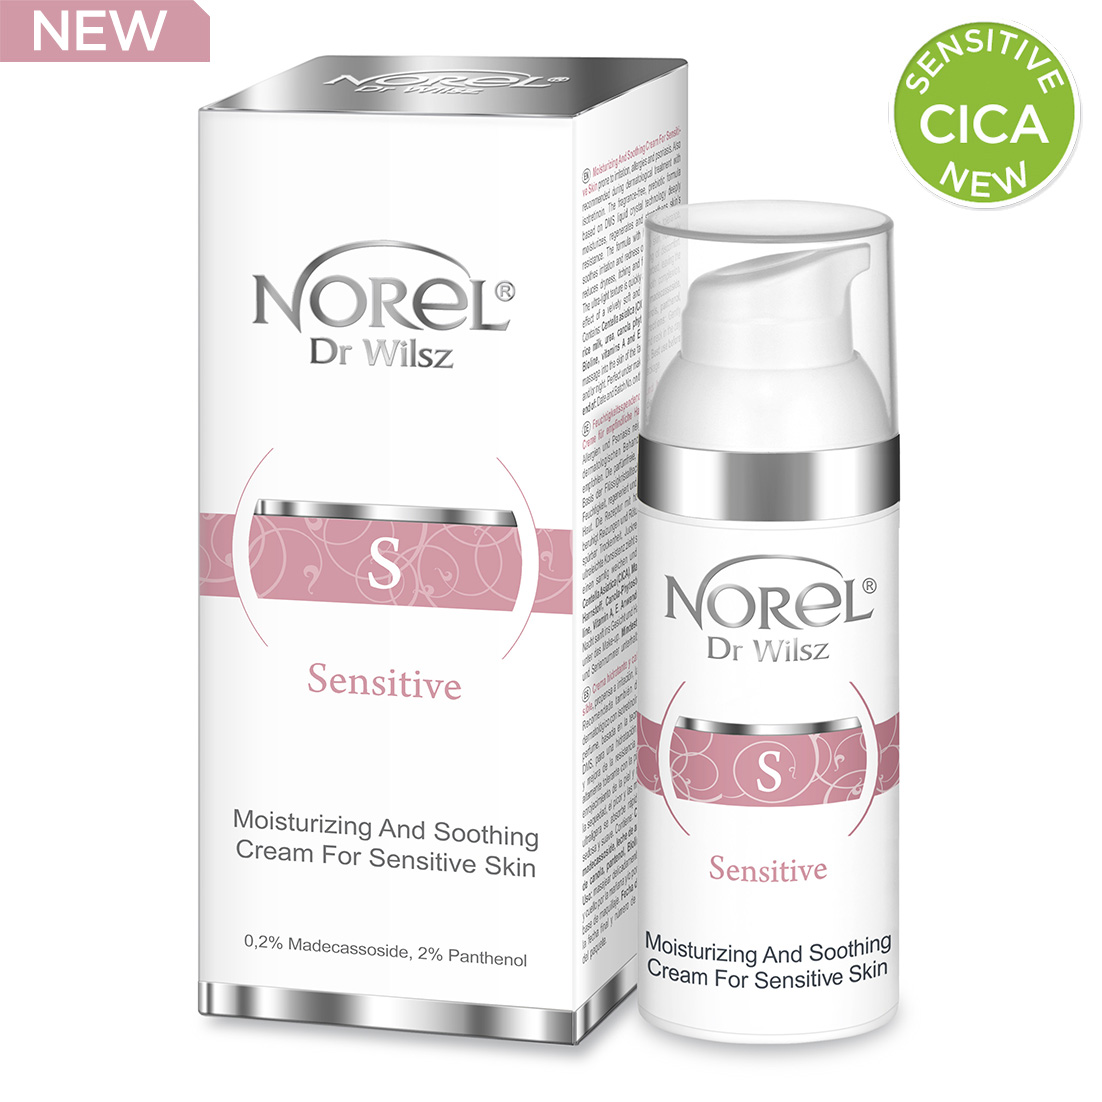 Moisturizing And Soothing Cream For Sensitive Skin